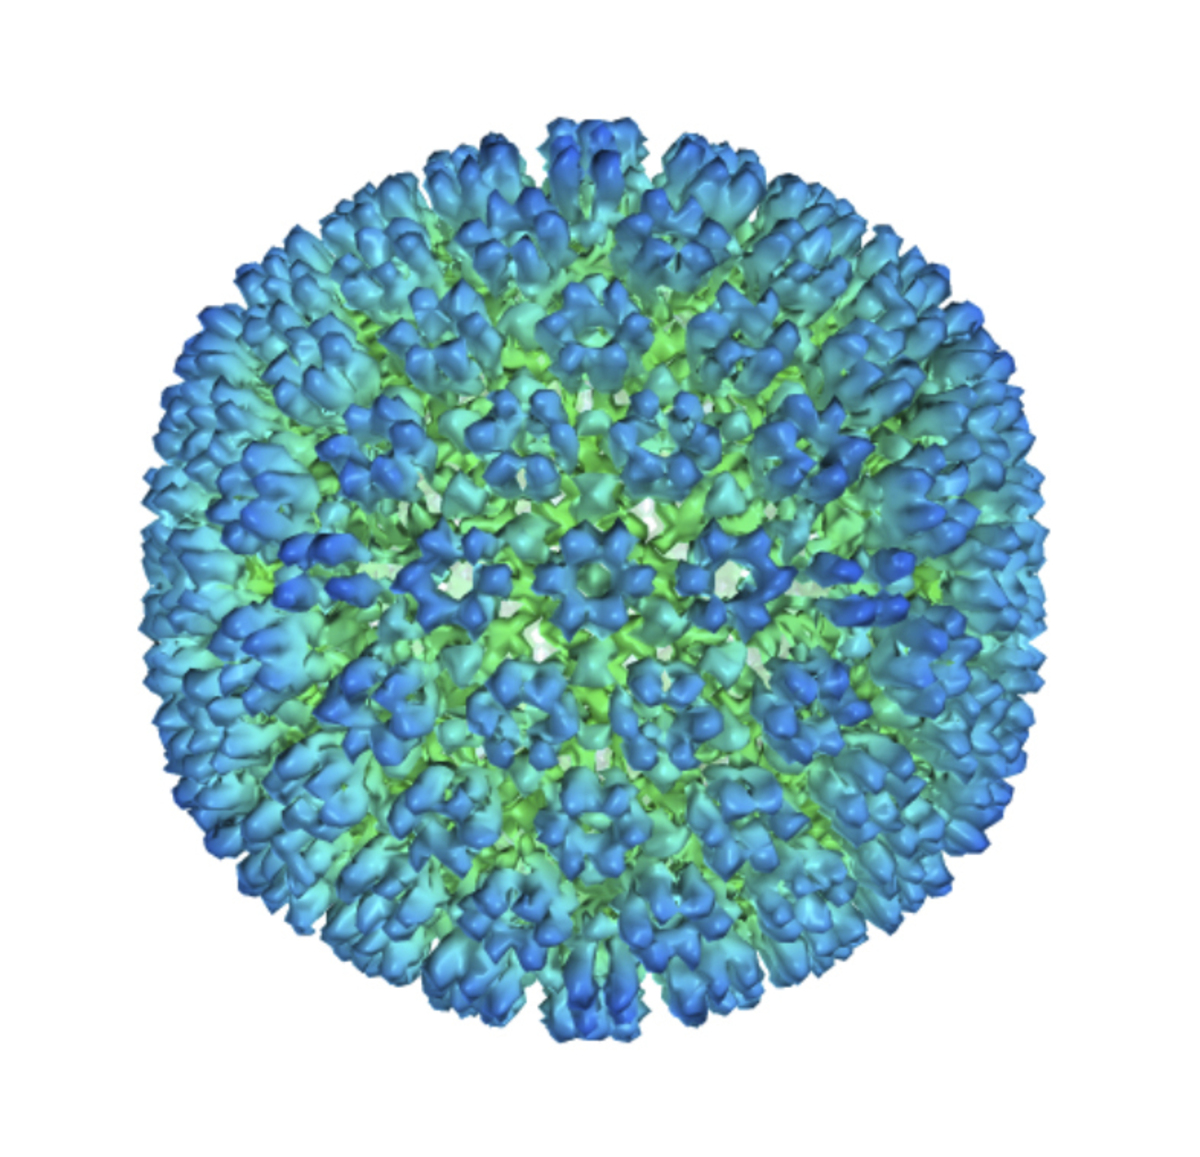 This image provided by U.S. Department of Health and Human Services shows an illustration of the outer coating of the Epstein-Barr virus, one of the world’s most common viruses. New research is showing stronger evidence that Epstein-Barr infection could set some people on the path to later developing multiple sclerosis.